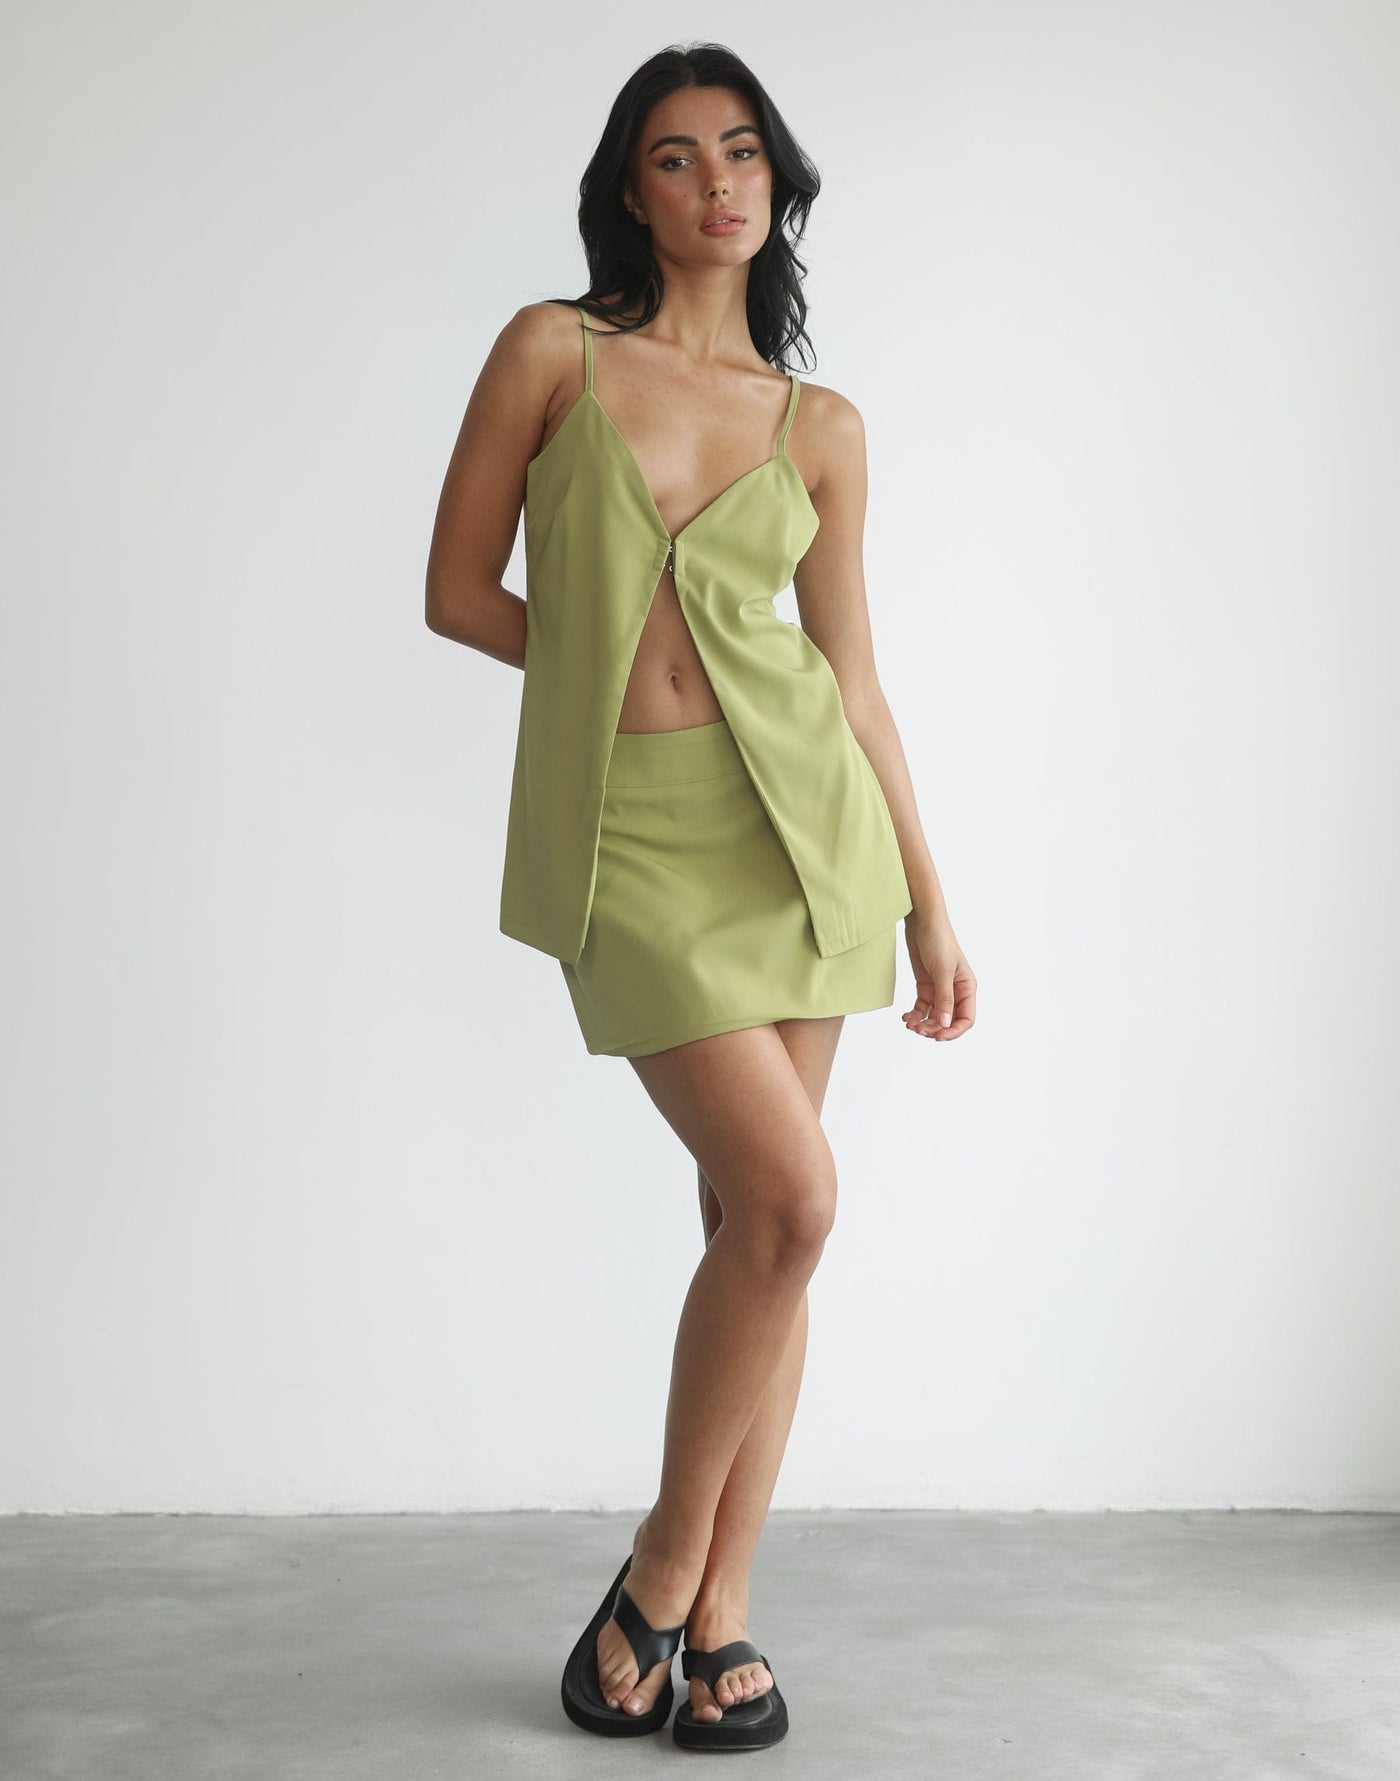 Orchid Top (Olive) - Green Open Front Top - Women's Top - Charcoal Clothing